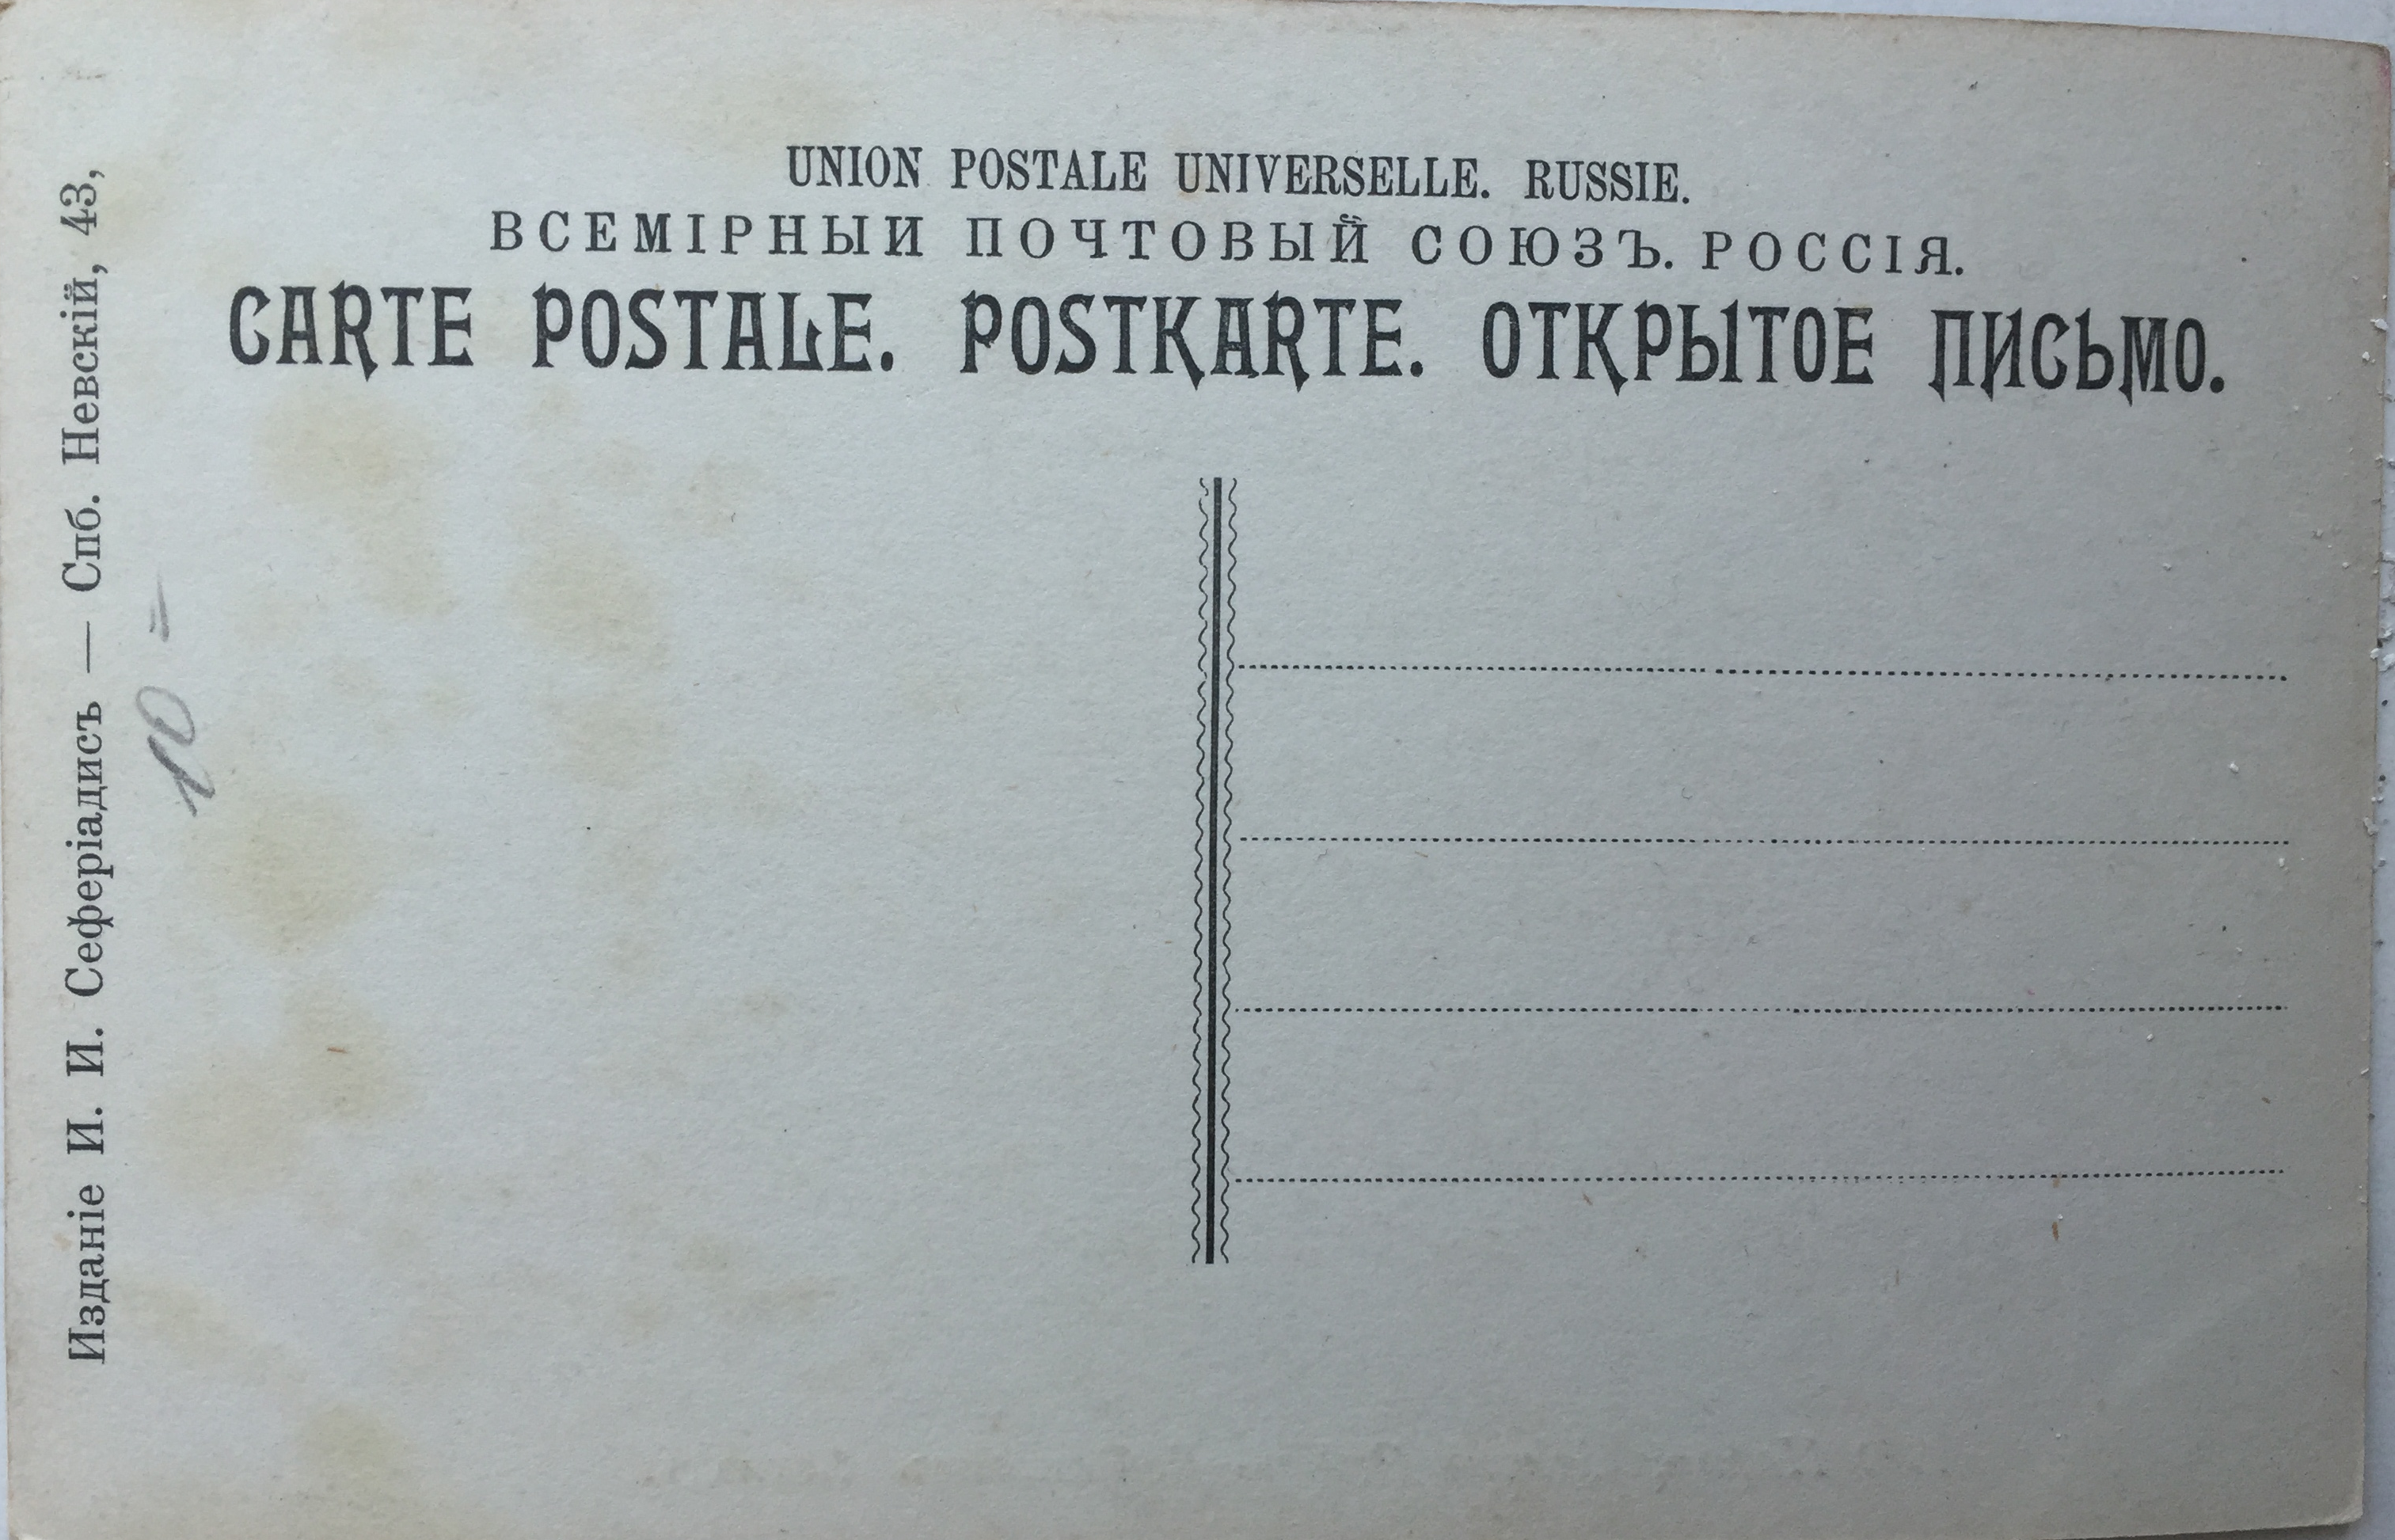 Reverse of a postcard. The word ‘postcard’ is translated into French, German, and Russian. Text on the left-hand side indicates that it was printed at the Seferialdis firm on Nevskii Prospekt, St. Petersburg. 